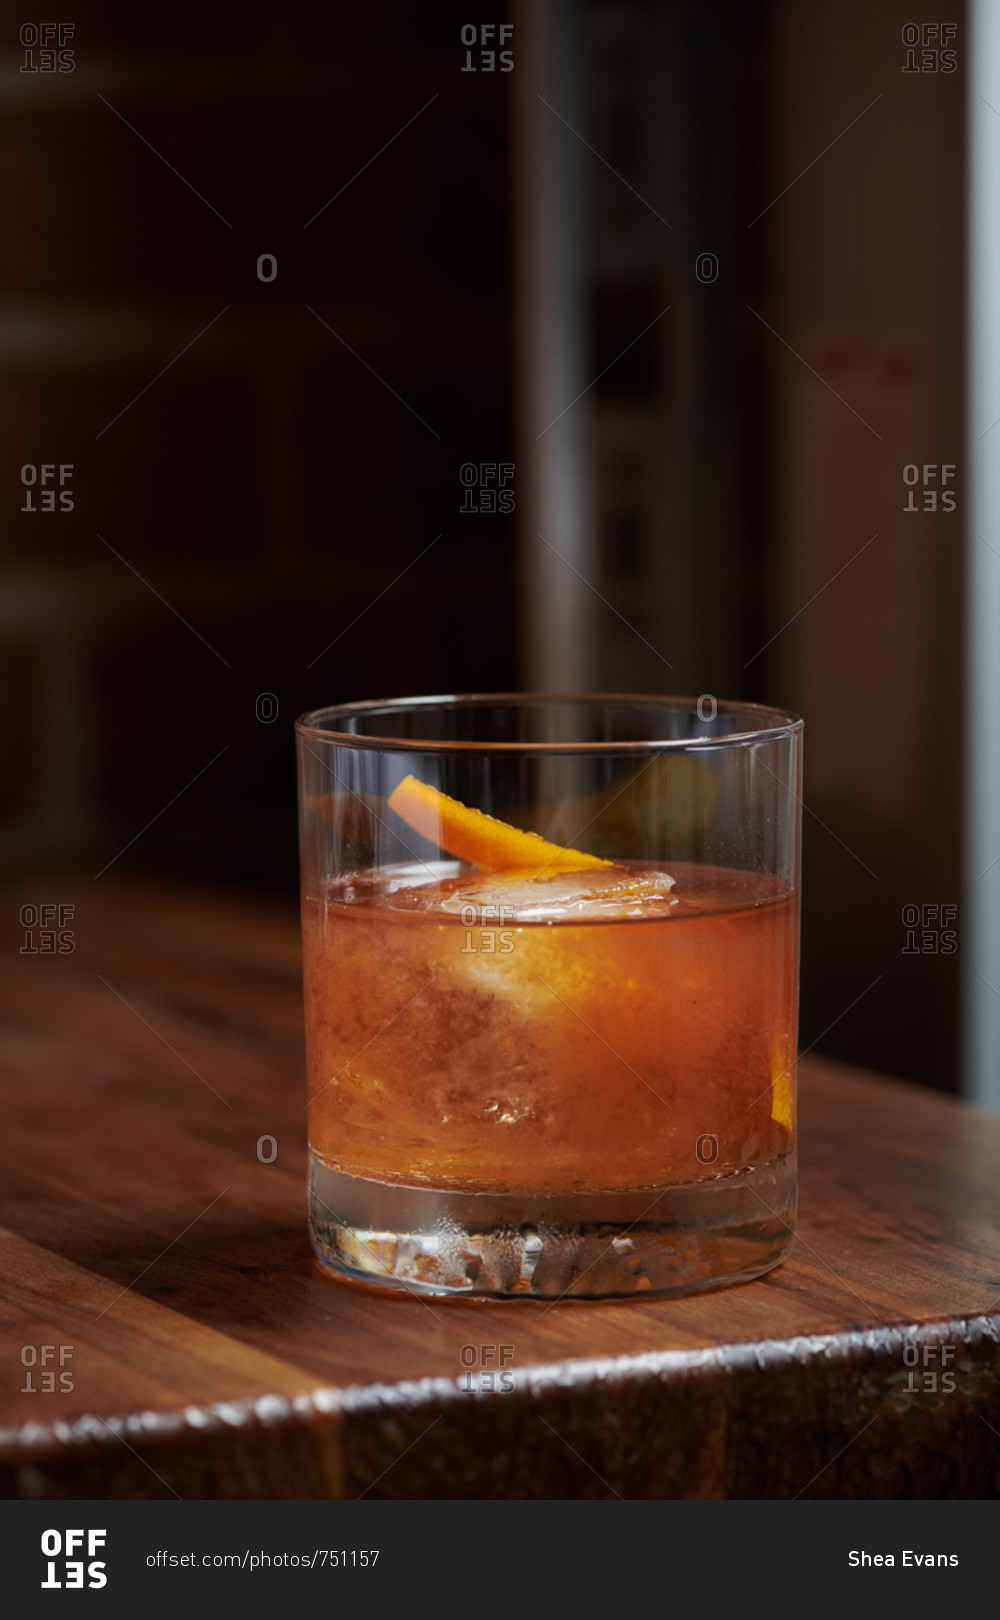 An old fashioned cocktail sits on a wooden table in a tapas style restaurant with a twist of orange peel garnishing the rocks glass with a single ice cube inside. The drink consists of rye whiskey, fig puree, angosturia, and old fashioned bitters.